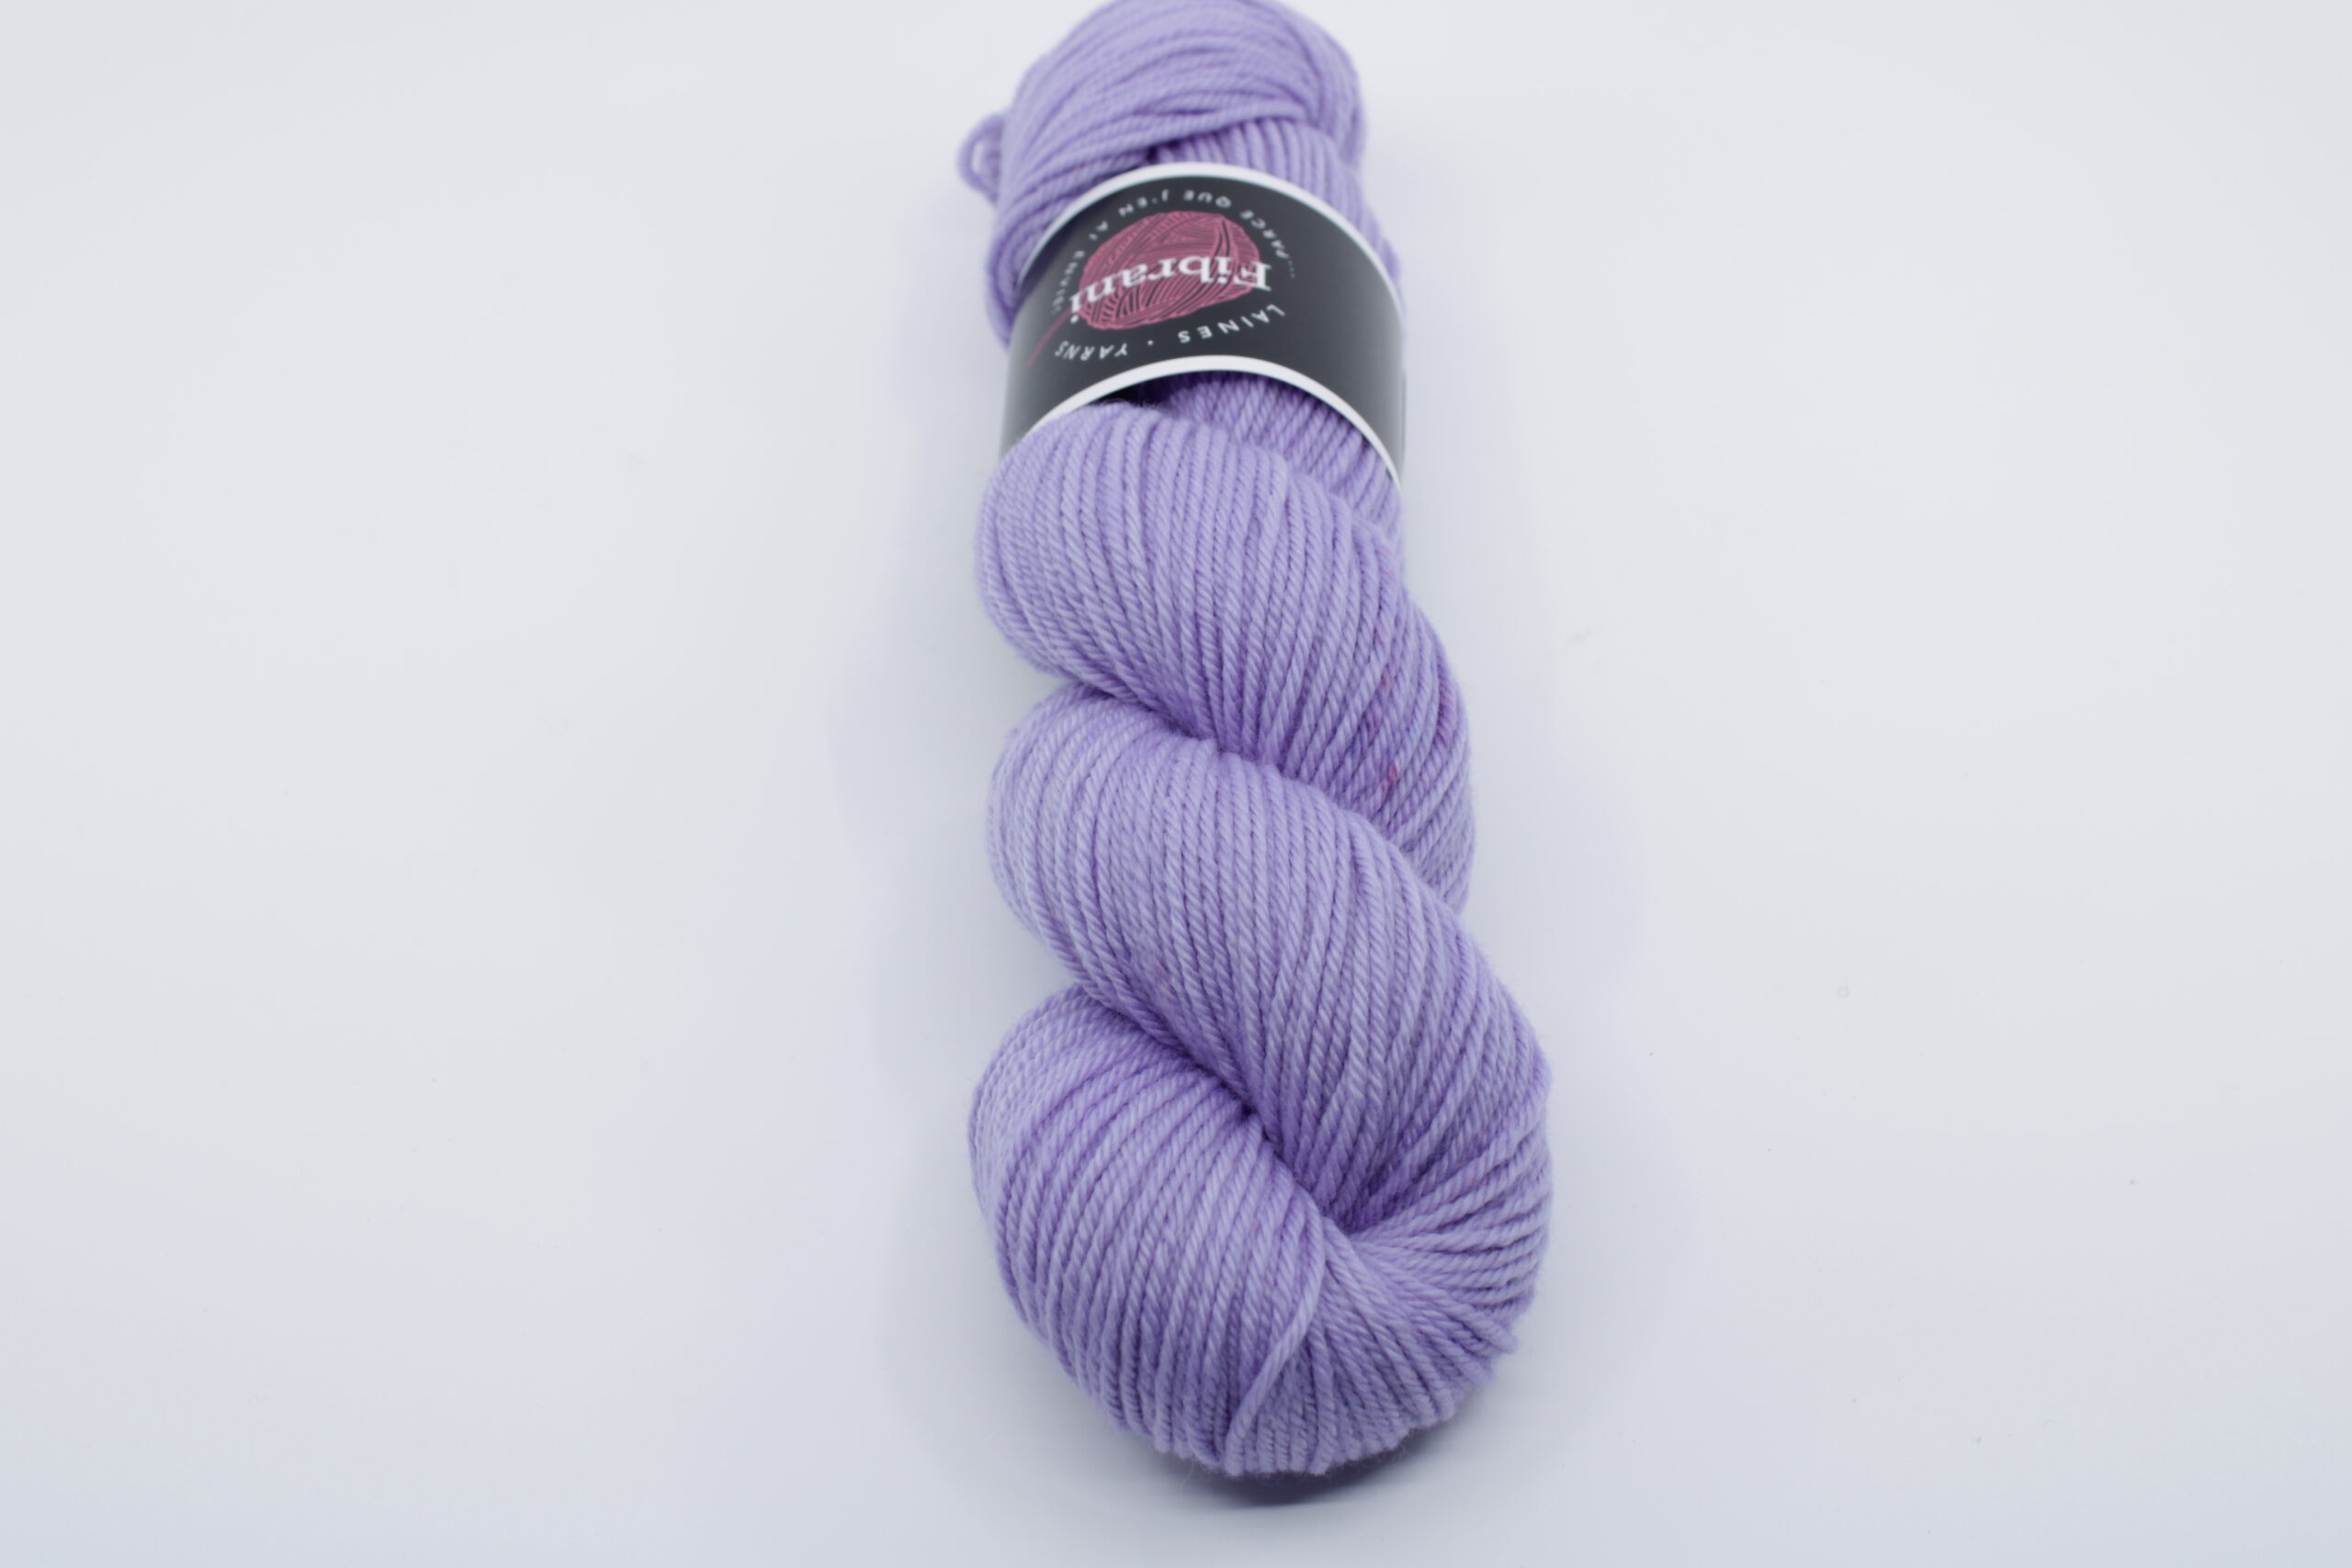 Folcon worsted base. Wool 100% untreated merino. Trio of colors: lilac. Color: Malvina.